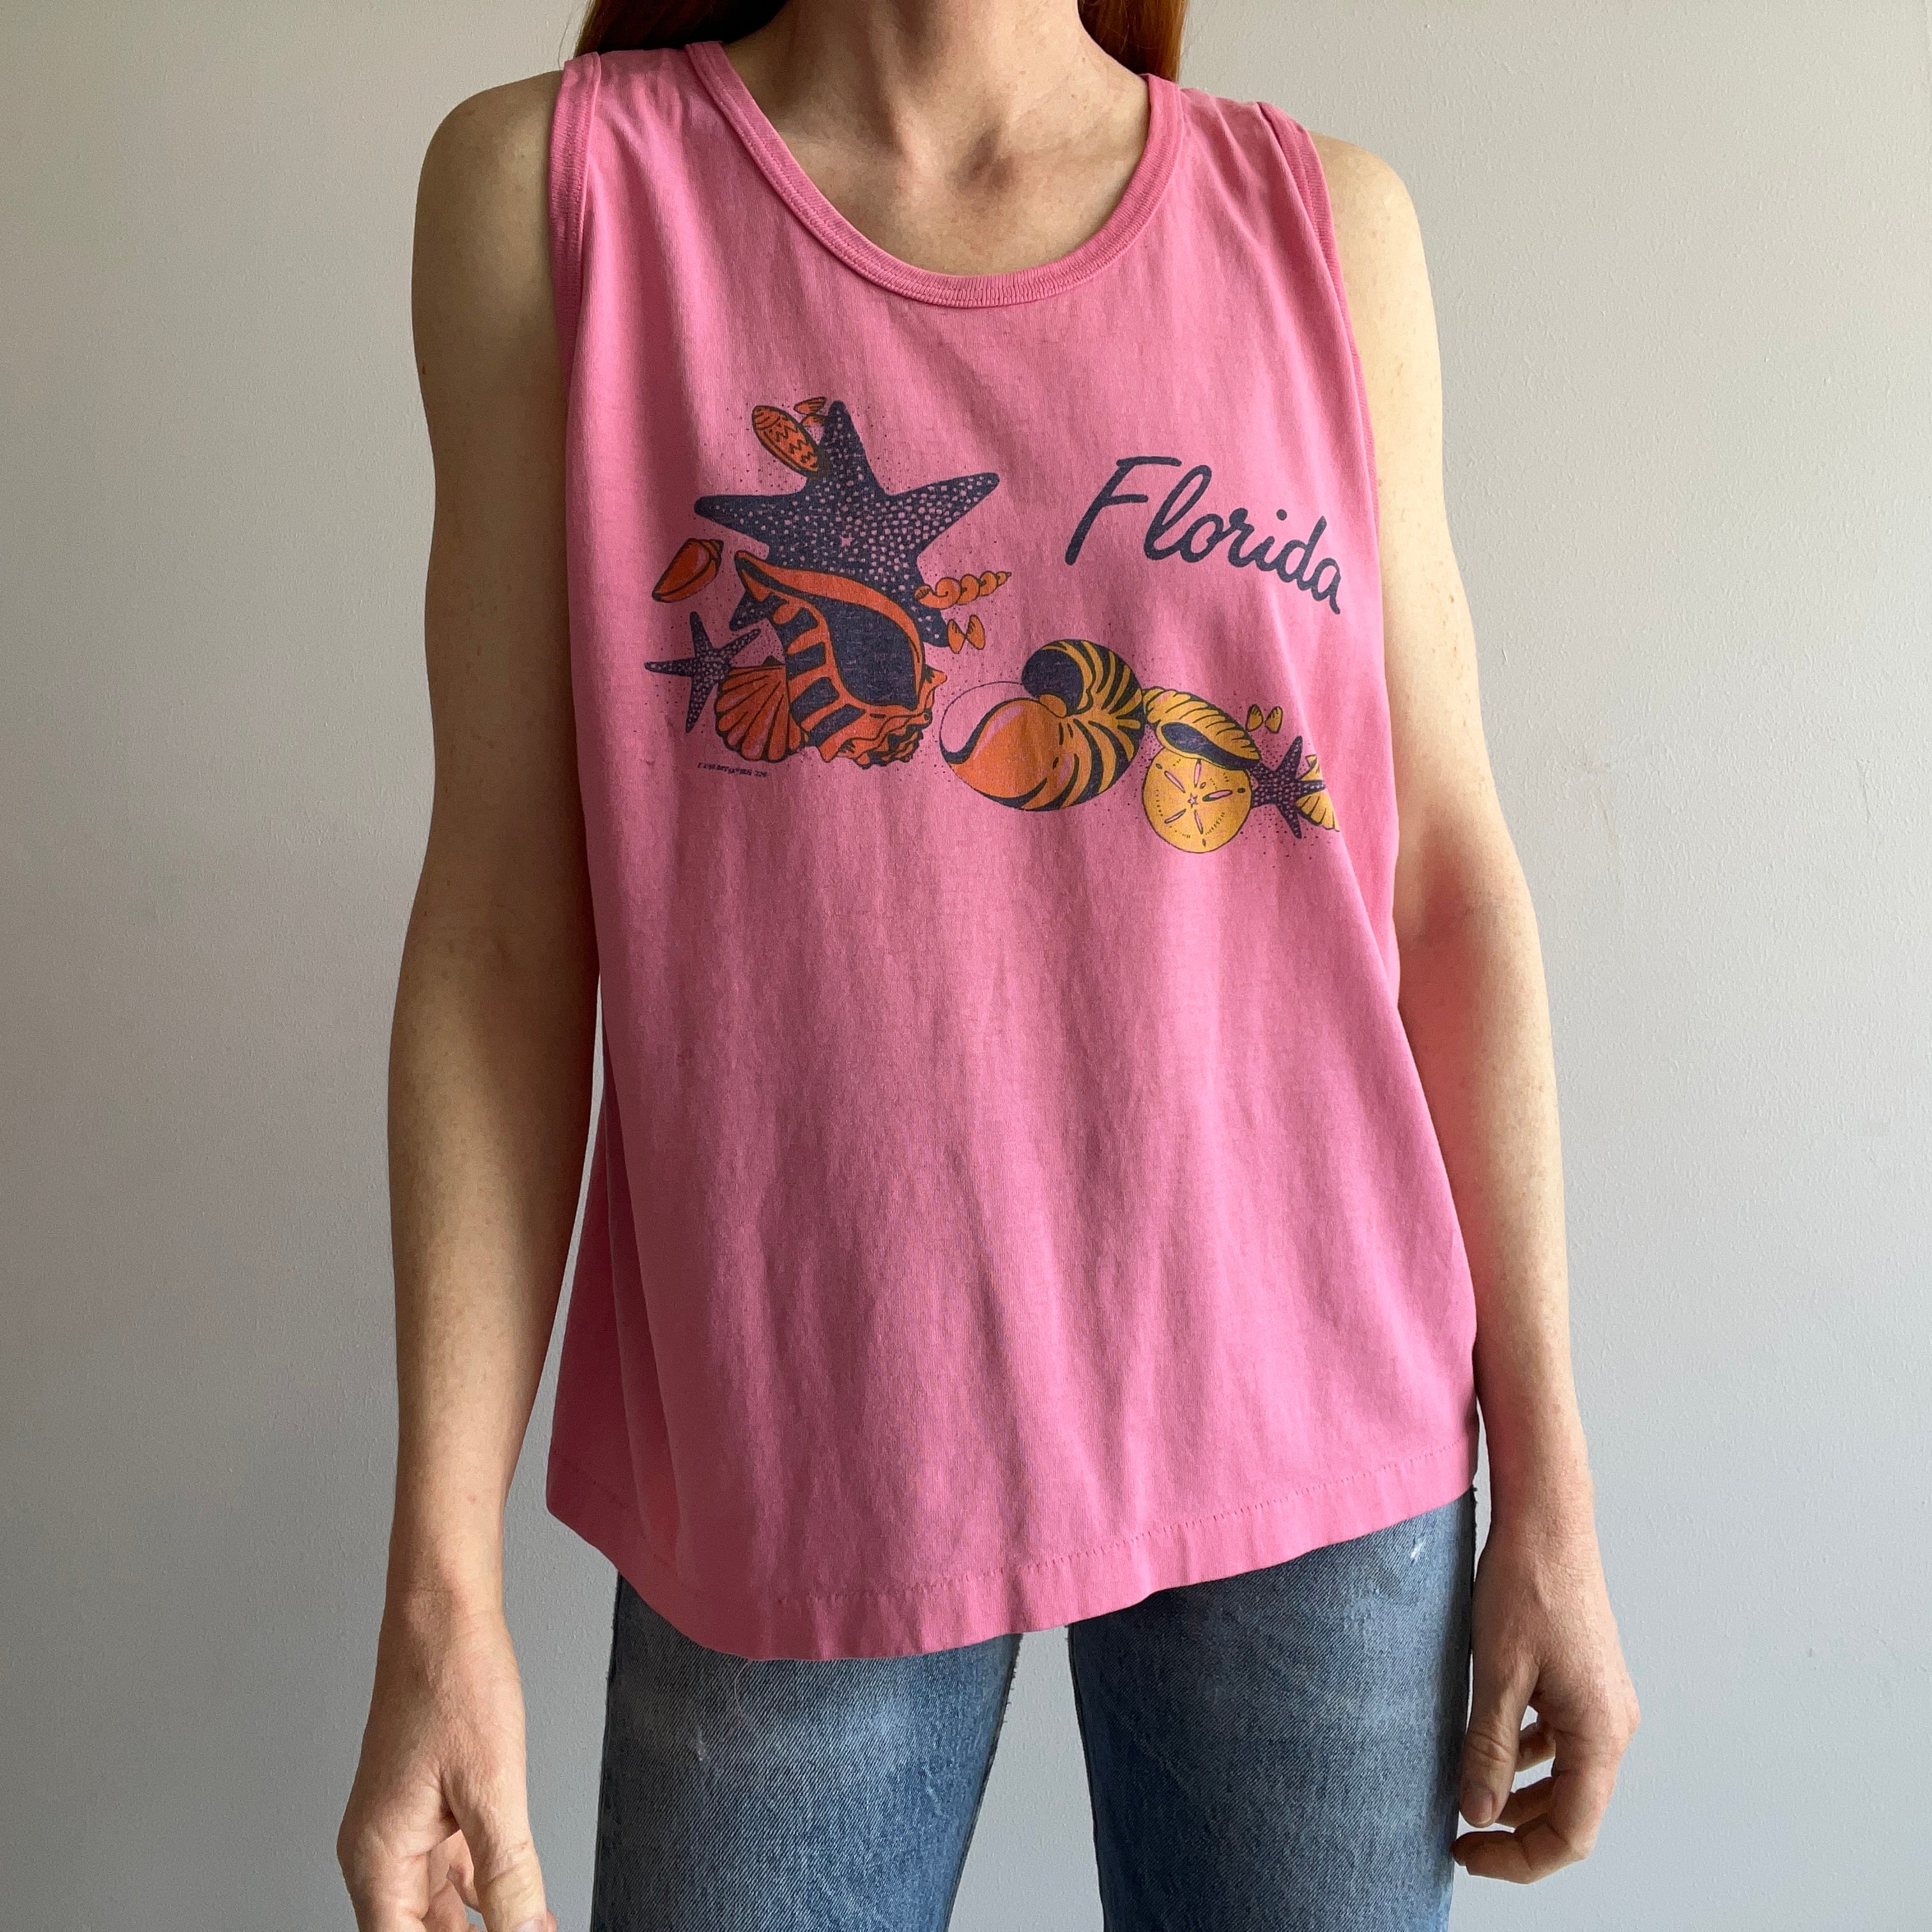 1990s Thinned Out Florida Tourist Tank Top by Tee Jays